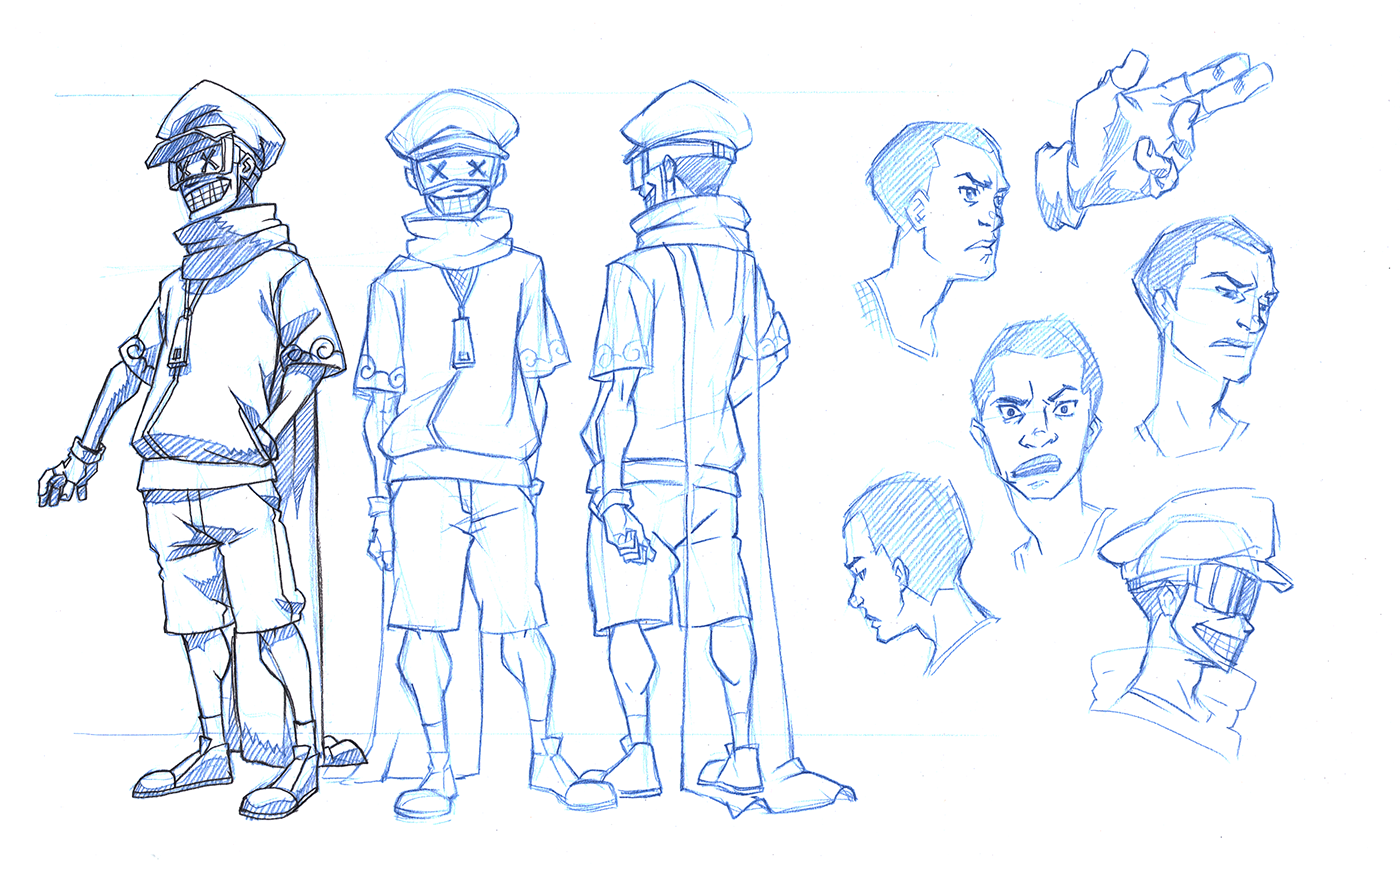 Character design cover design concepts sketches